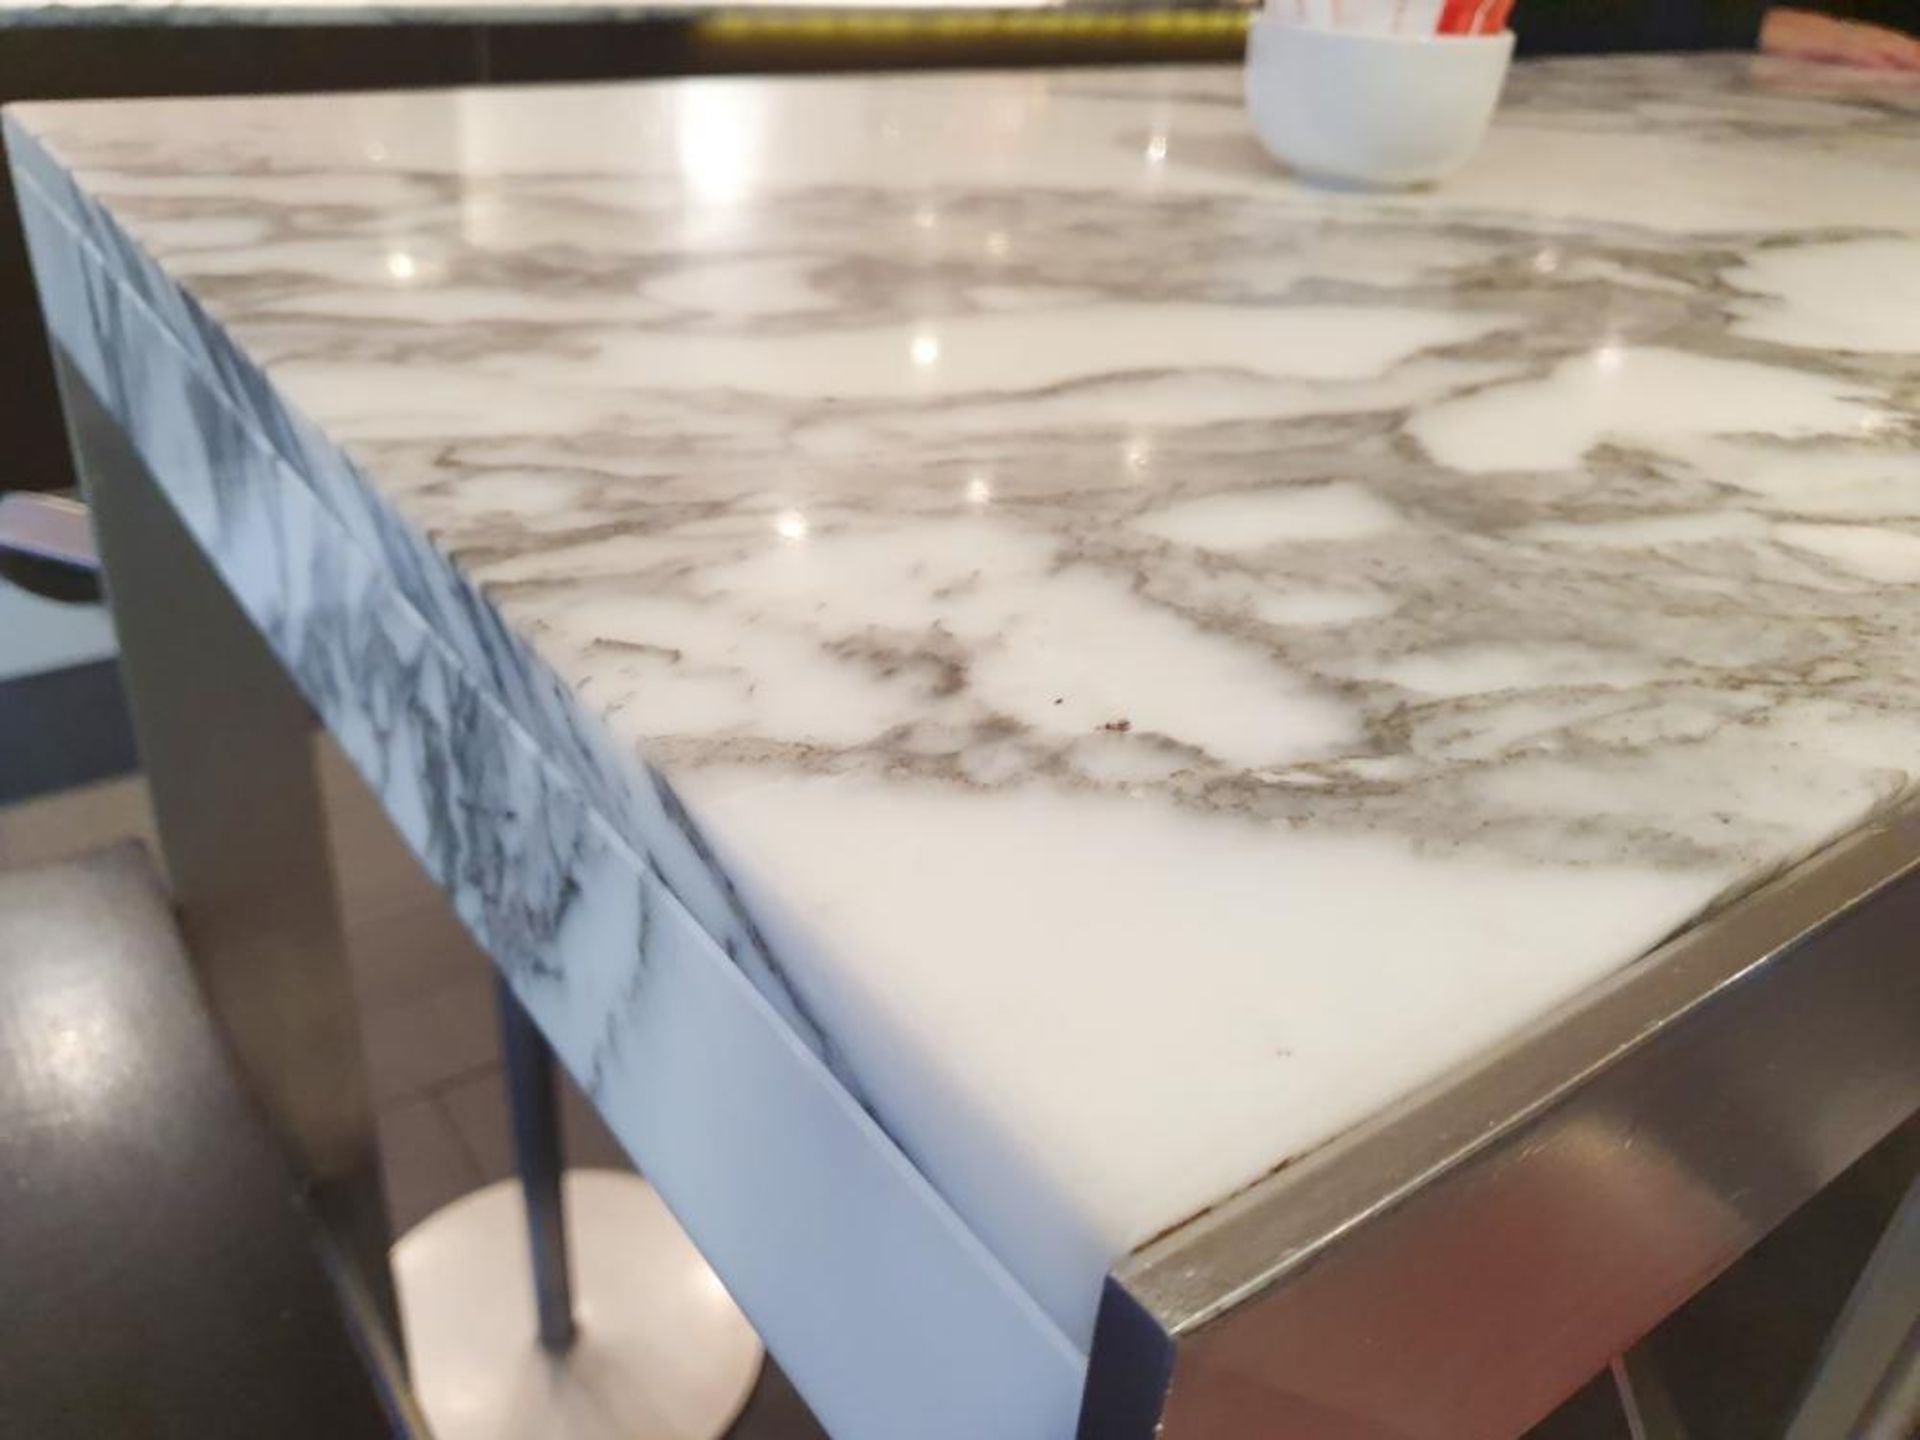 1 x White Marble/Granite Topped Cocktail Table - From A Milan-style City Centre Cafe - Image 5 of 7